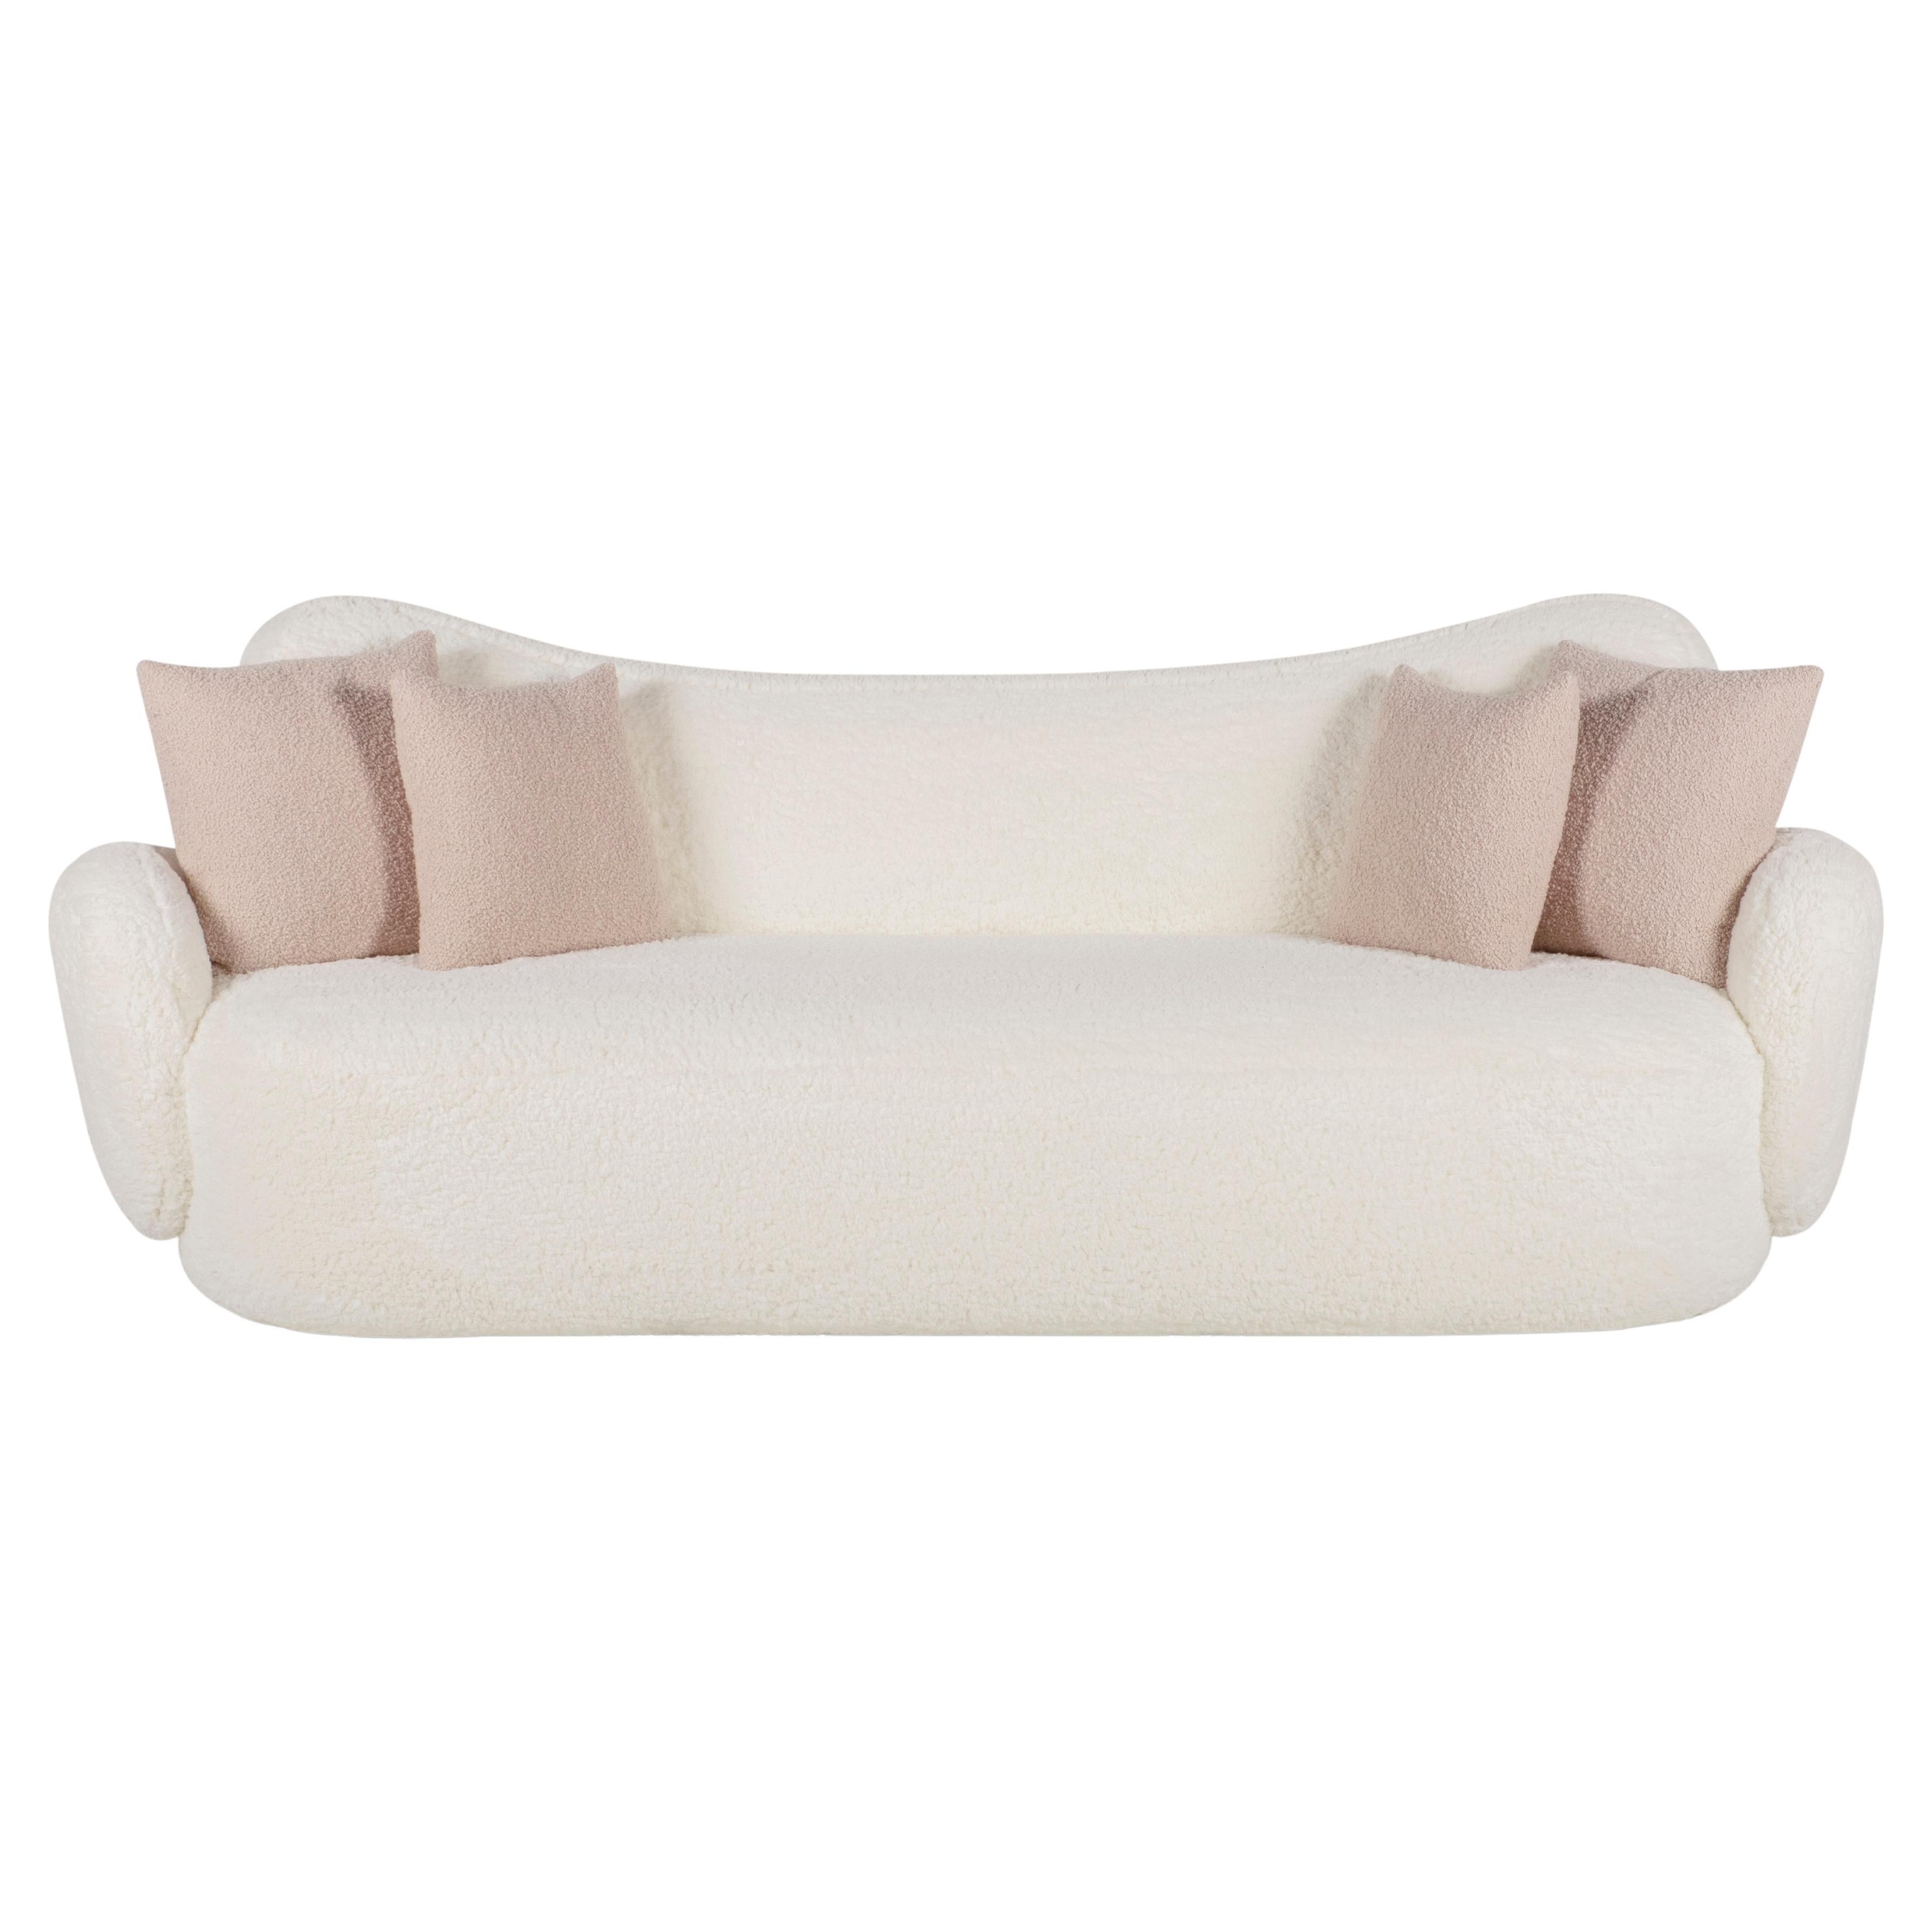 Modern Conchula Curved Sofa, Ivory Bouclé, Handmade in Portugal by Greenapple